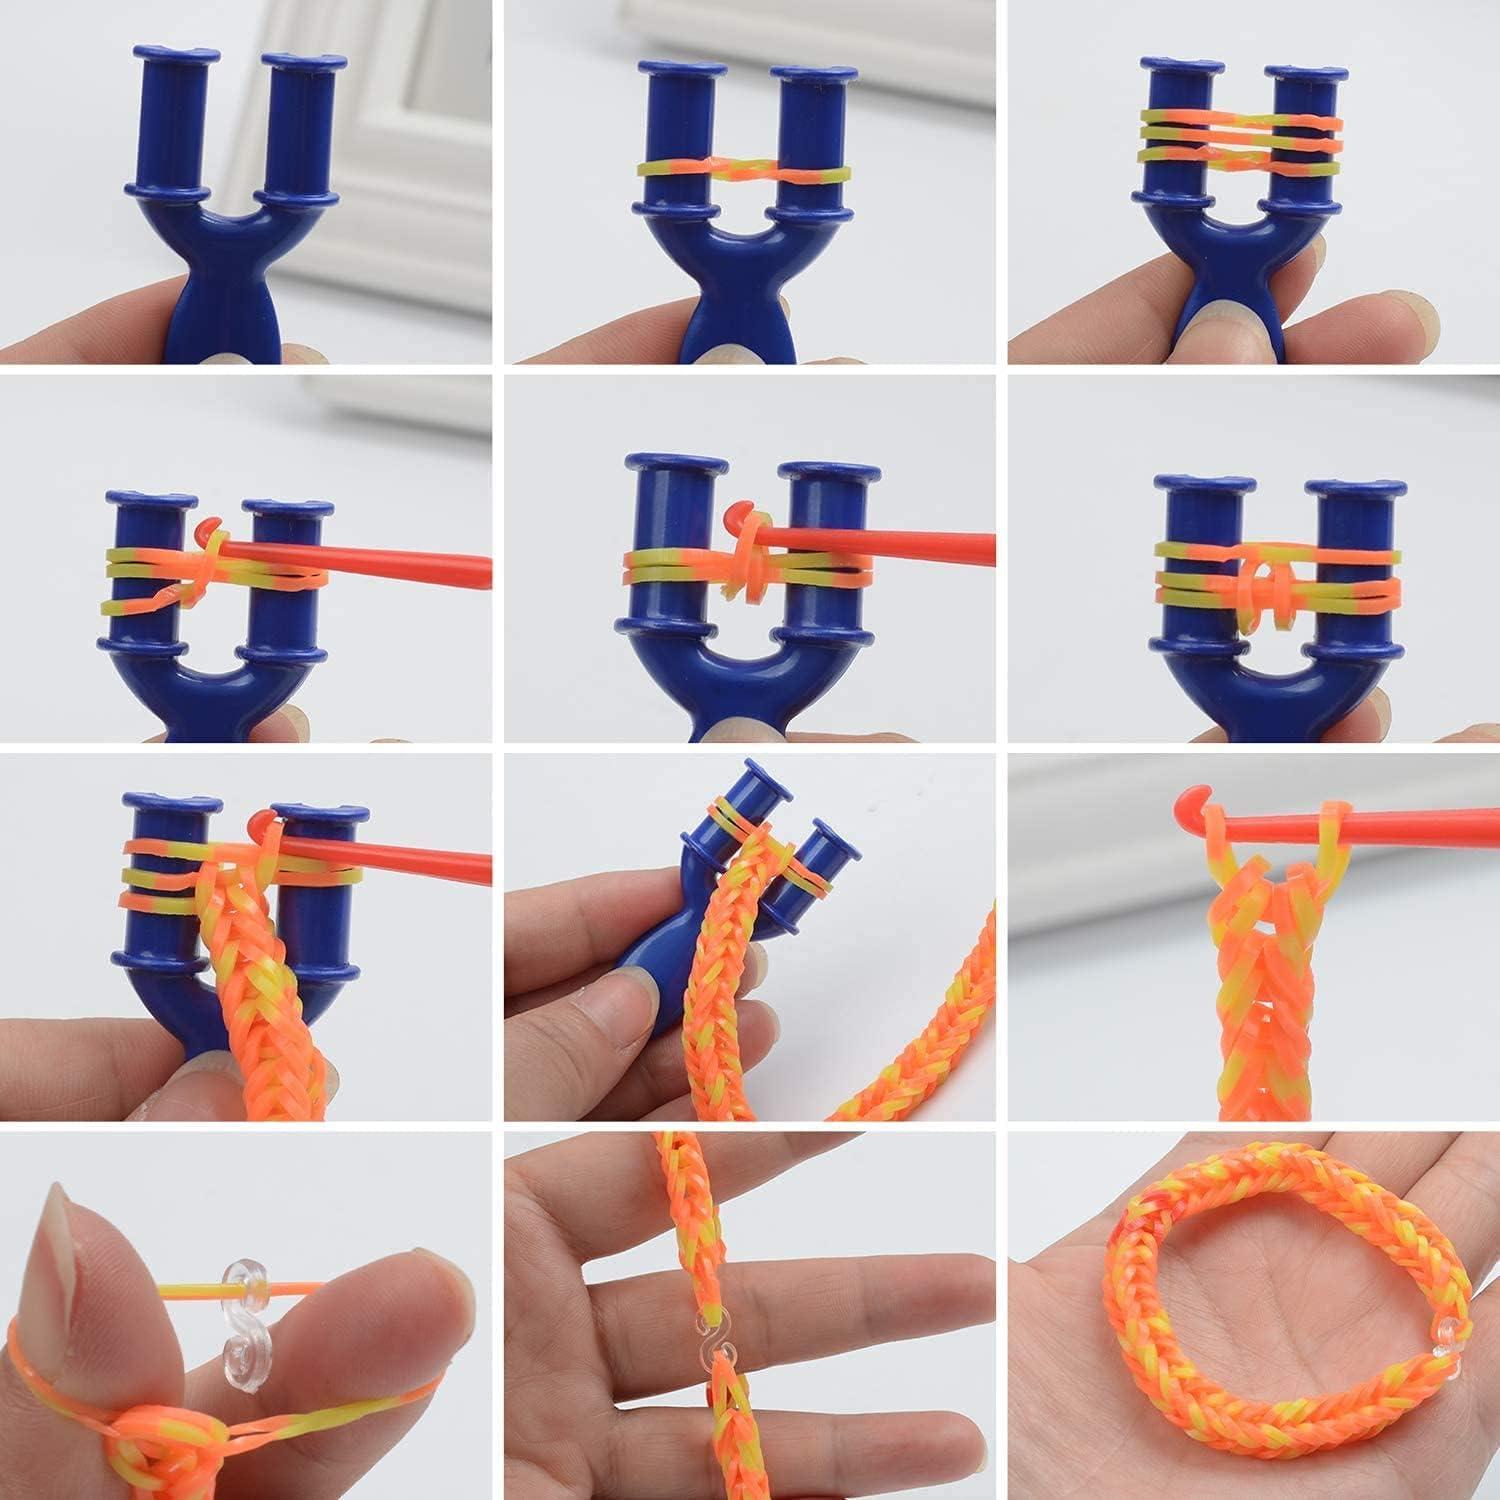 SHOI LITTLE 20 Pcs Funky Rubber Friendship Band for Girls and Boys (10  Wrist Band & 10 Ring Band) : Amazon.in: Jewellery